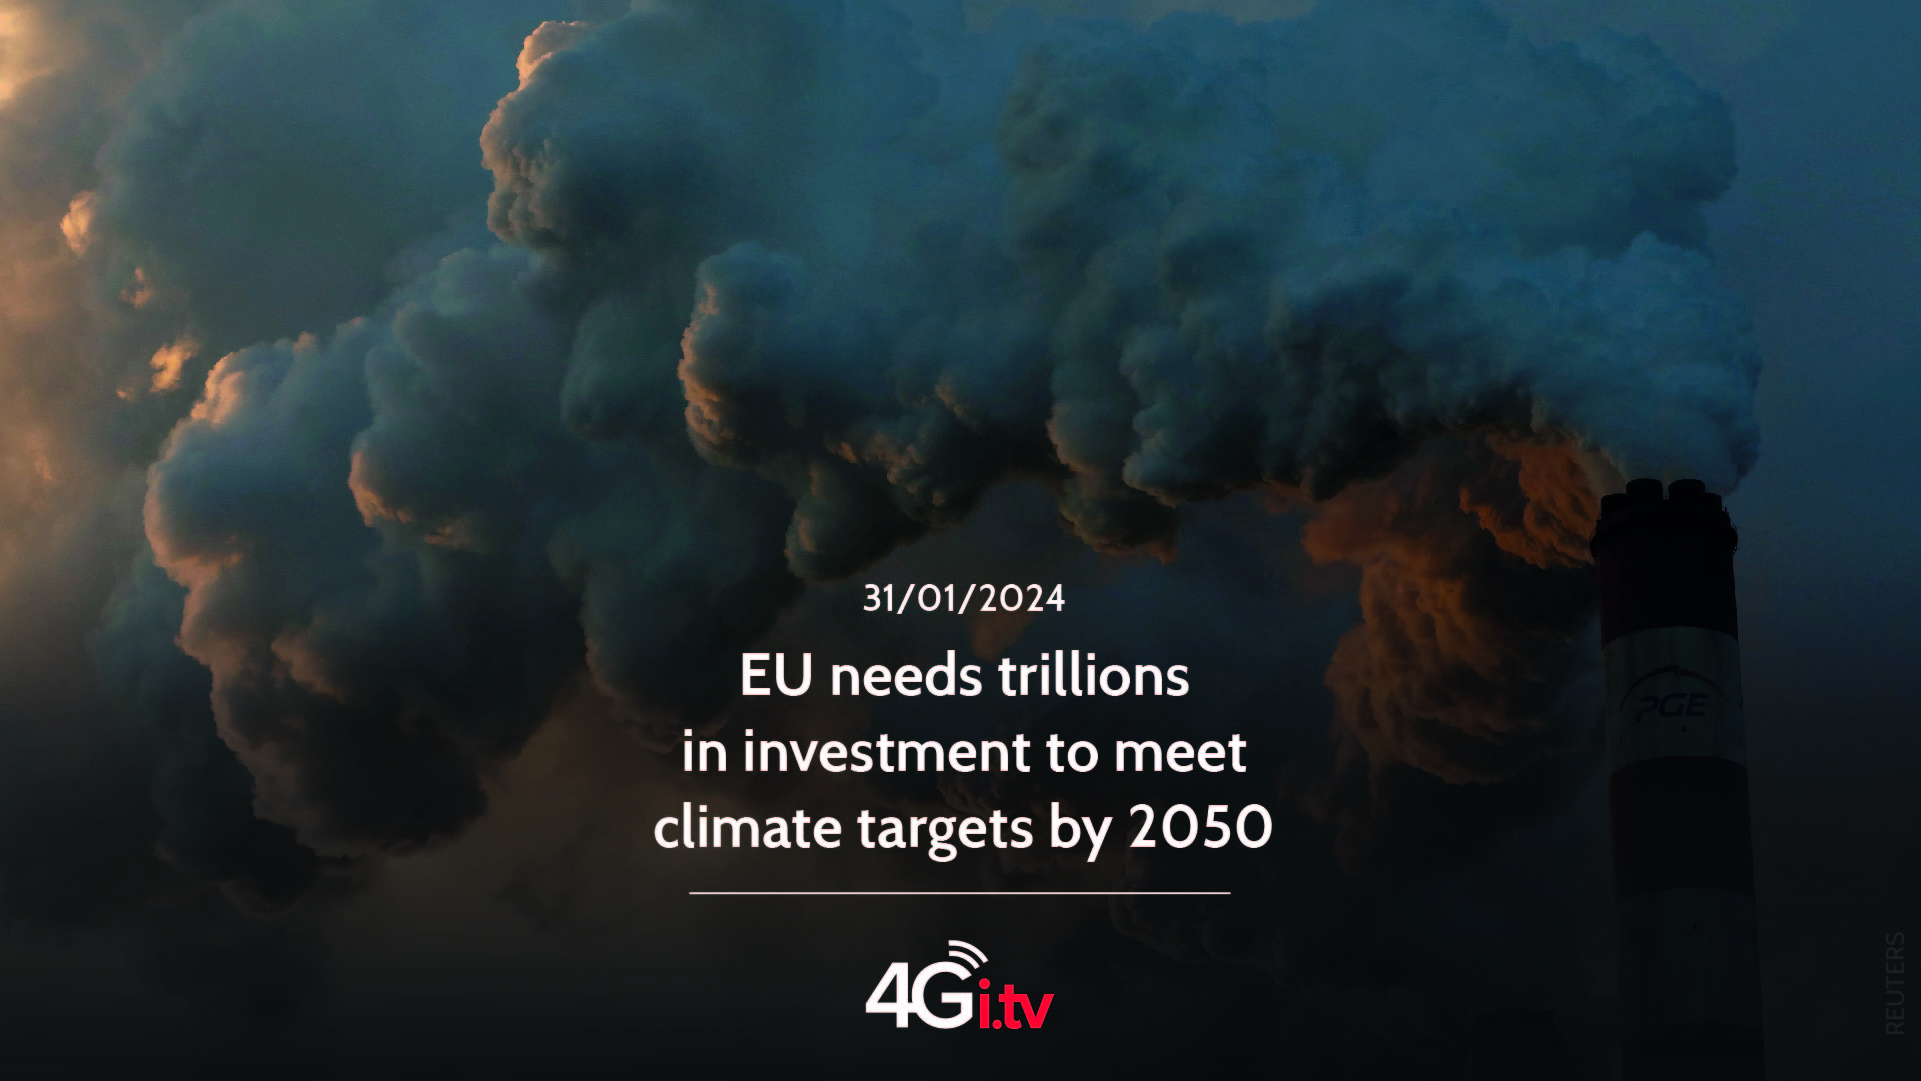 Подробнее о статье EU needs trillions in investment to meet climate targets by 2050